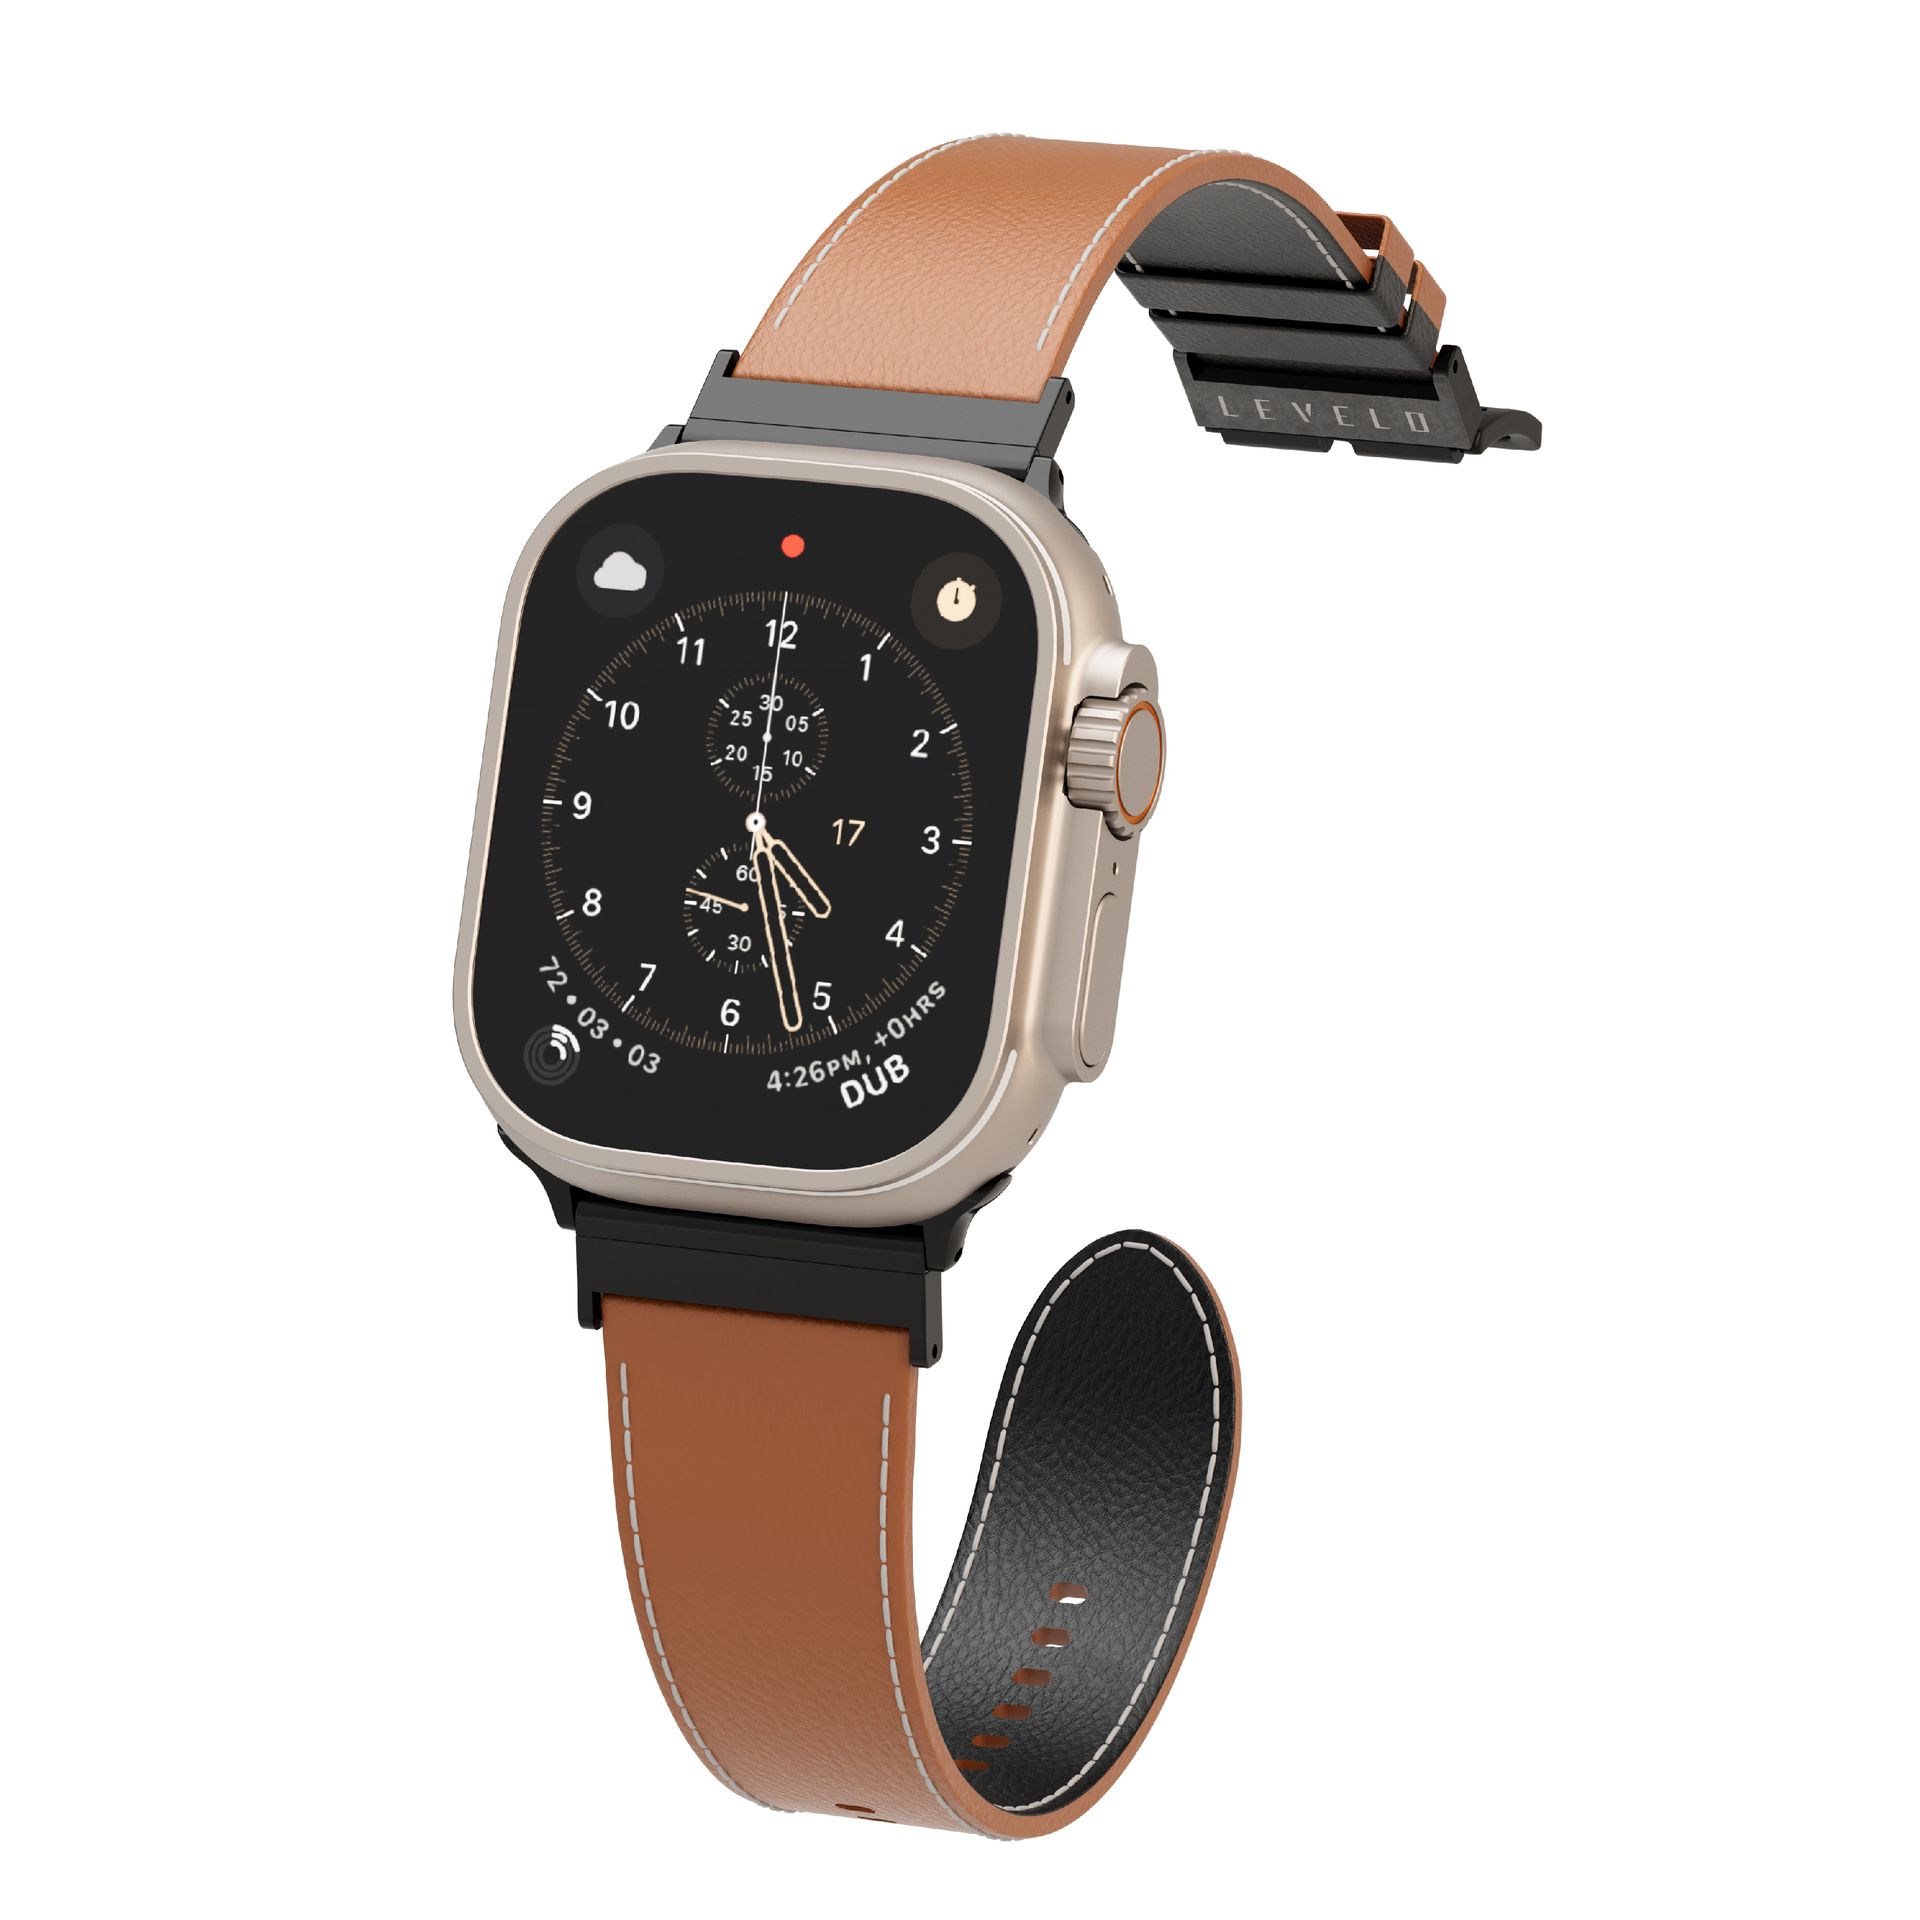 alt="leather apple and samung watch strap"